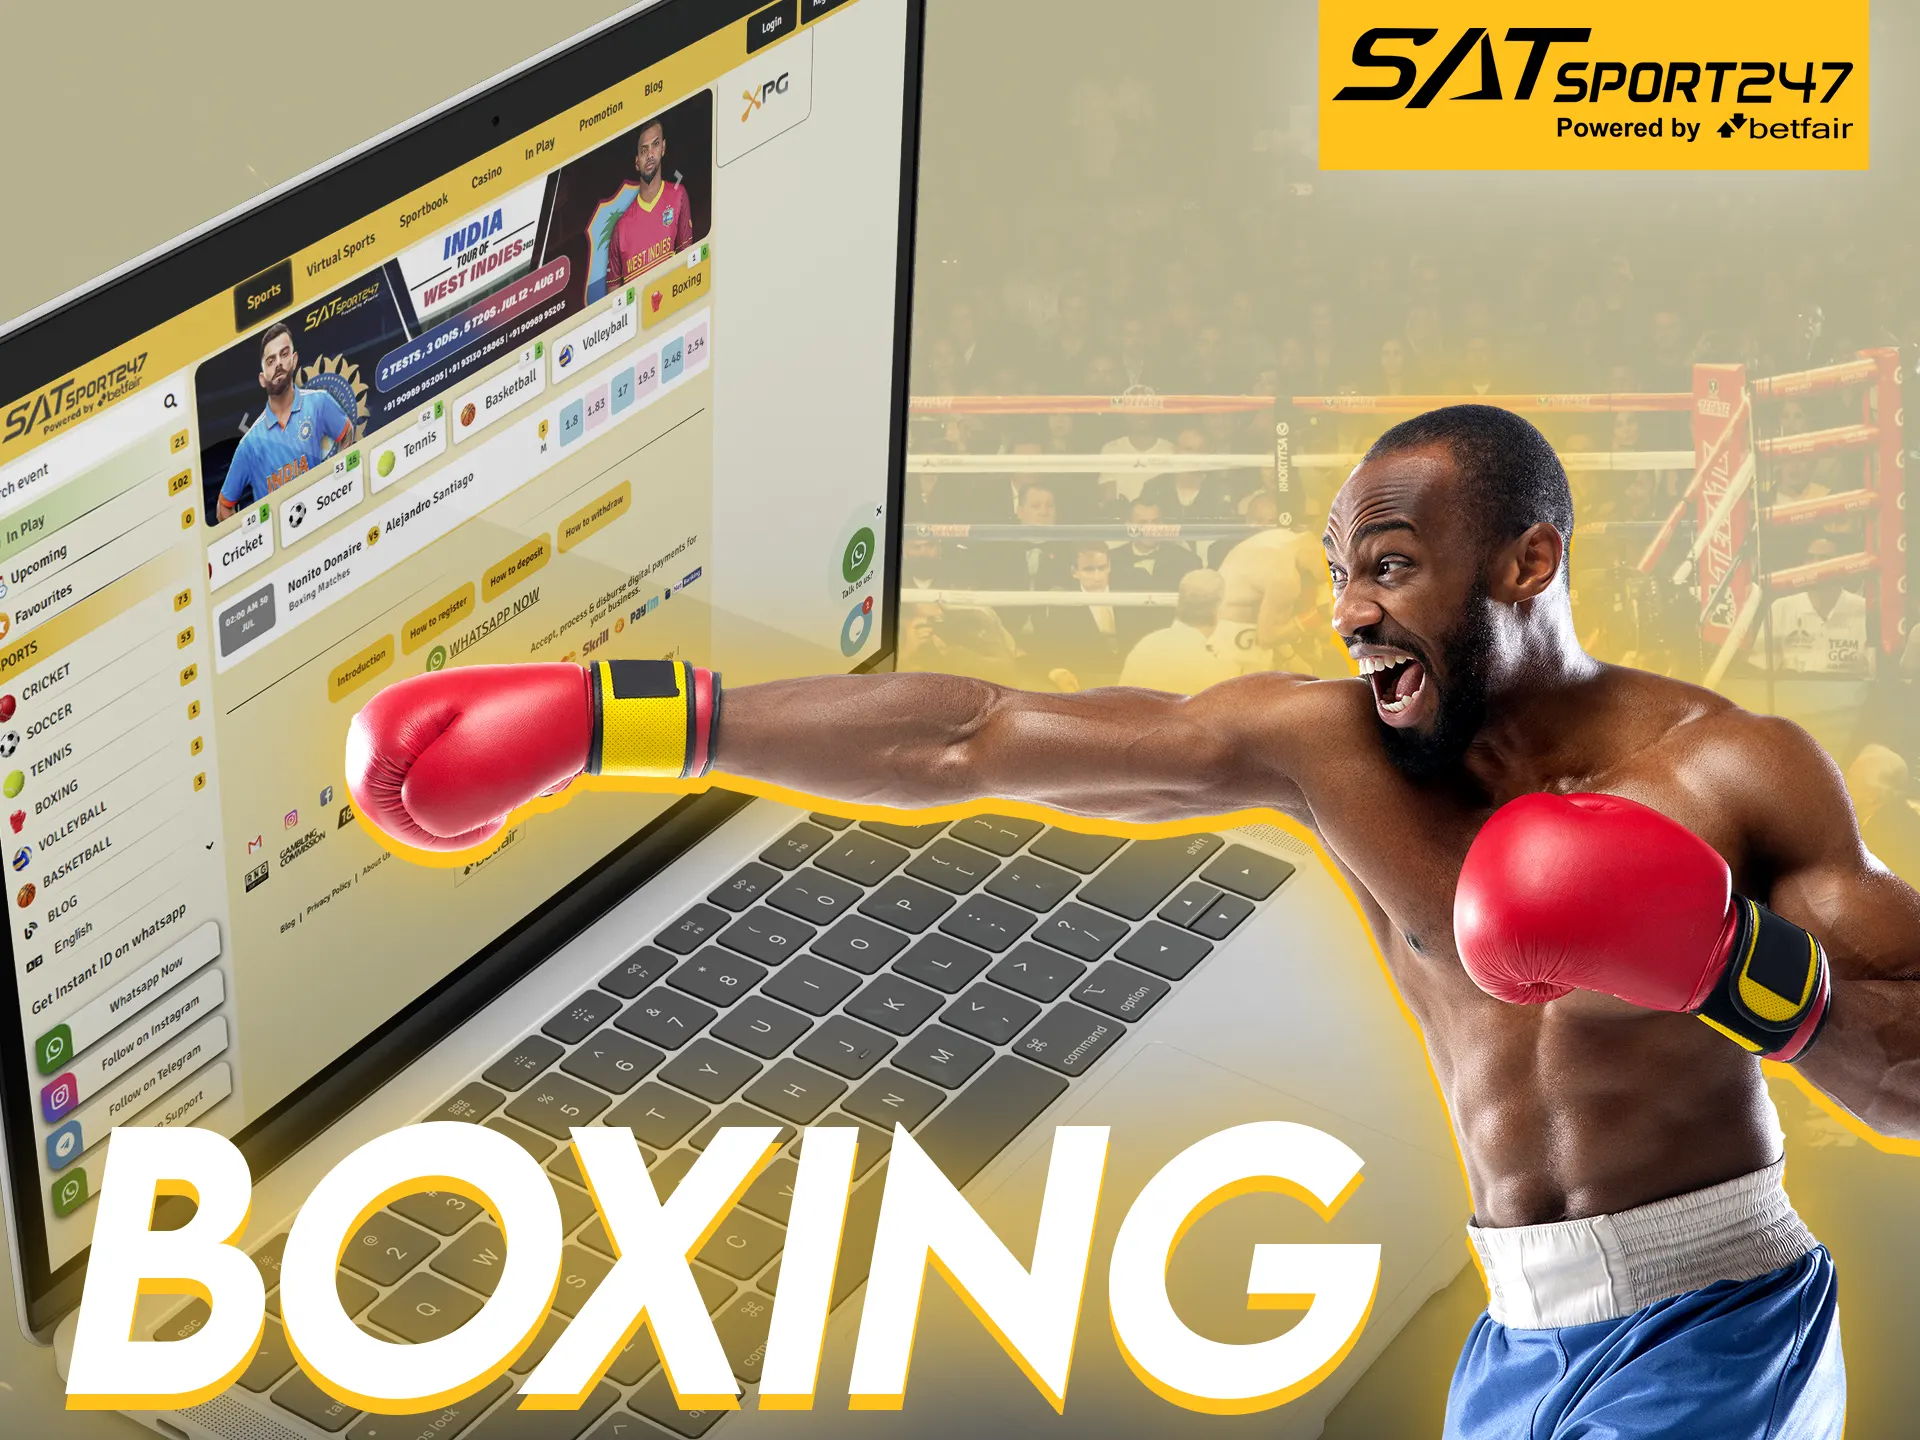 Bet on winning your favourite boxer at Satsport247.